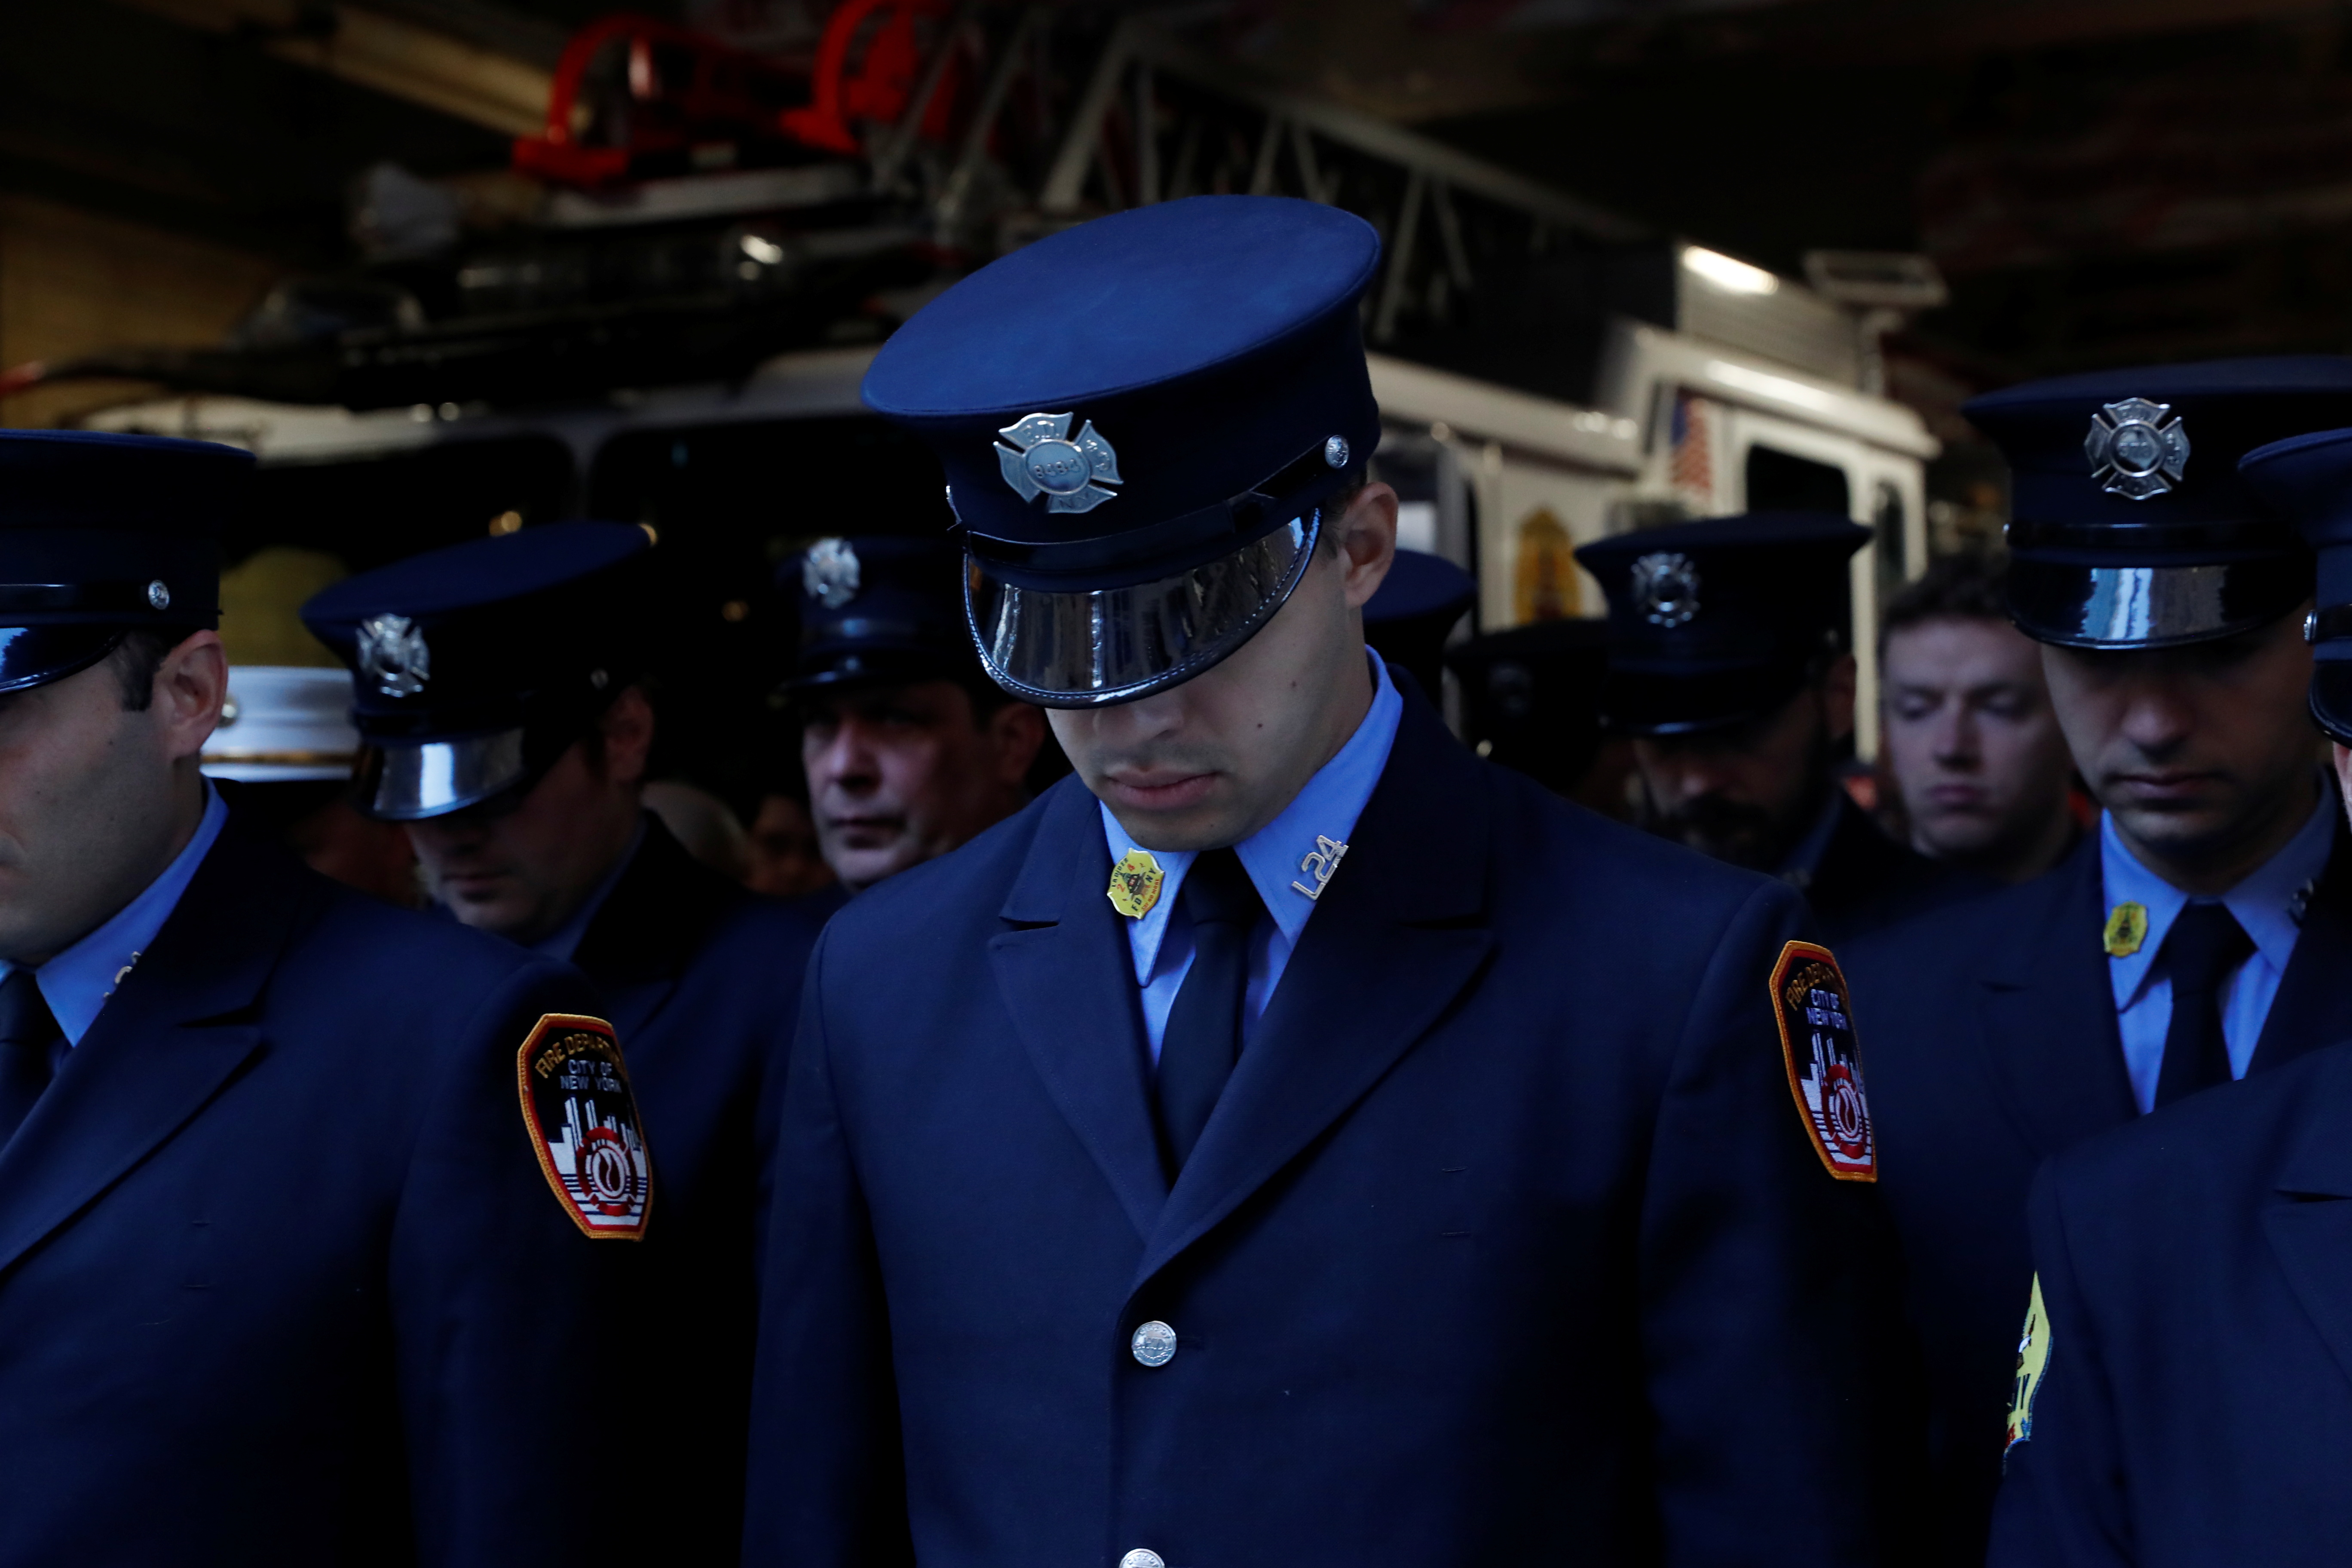 Firefighters attend a ceremony marking the 20th anniversary of the September 11, 2001 attacks, at the FDNY Engine 1/Ladder 24 fire house in New York City, New York, U.S., September 11, 2021.  REUTERS/Shannon Stapleton